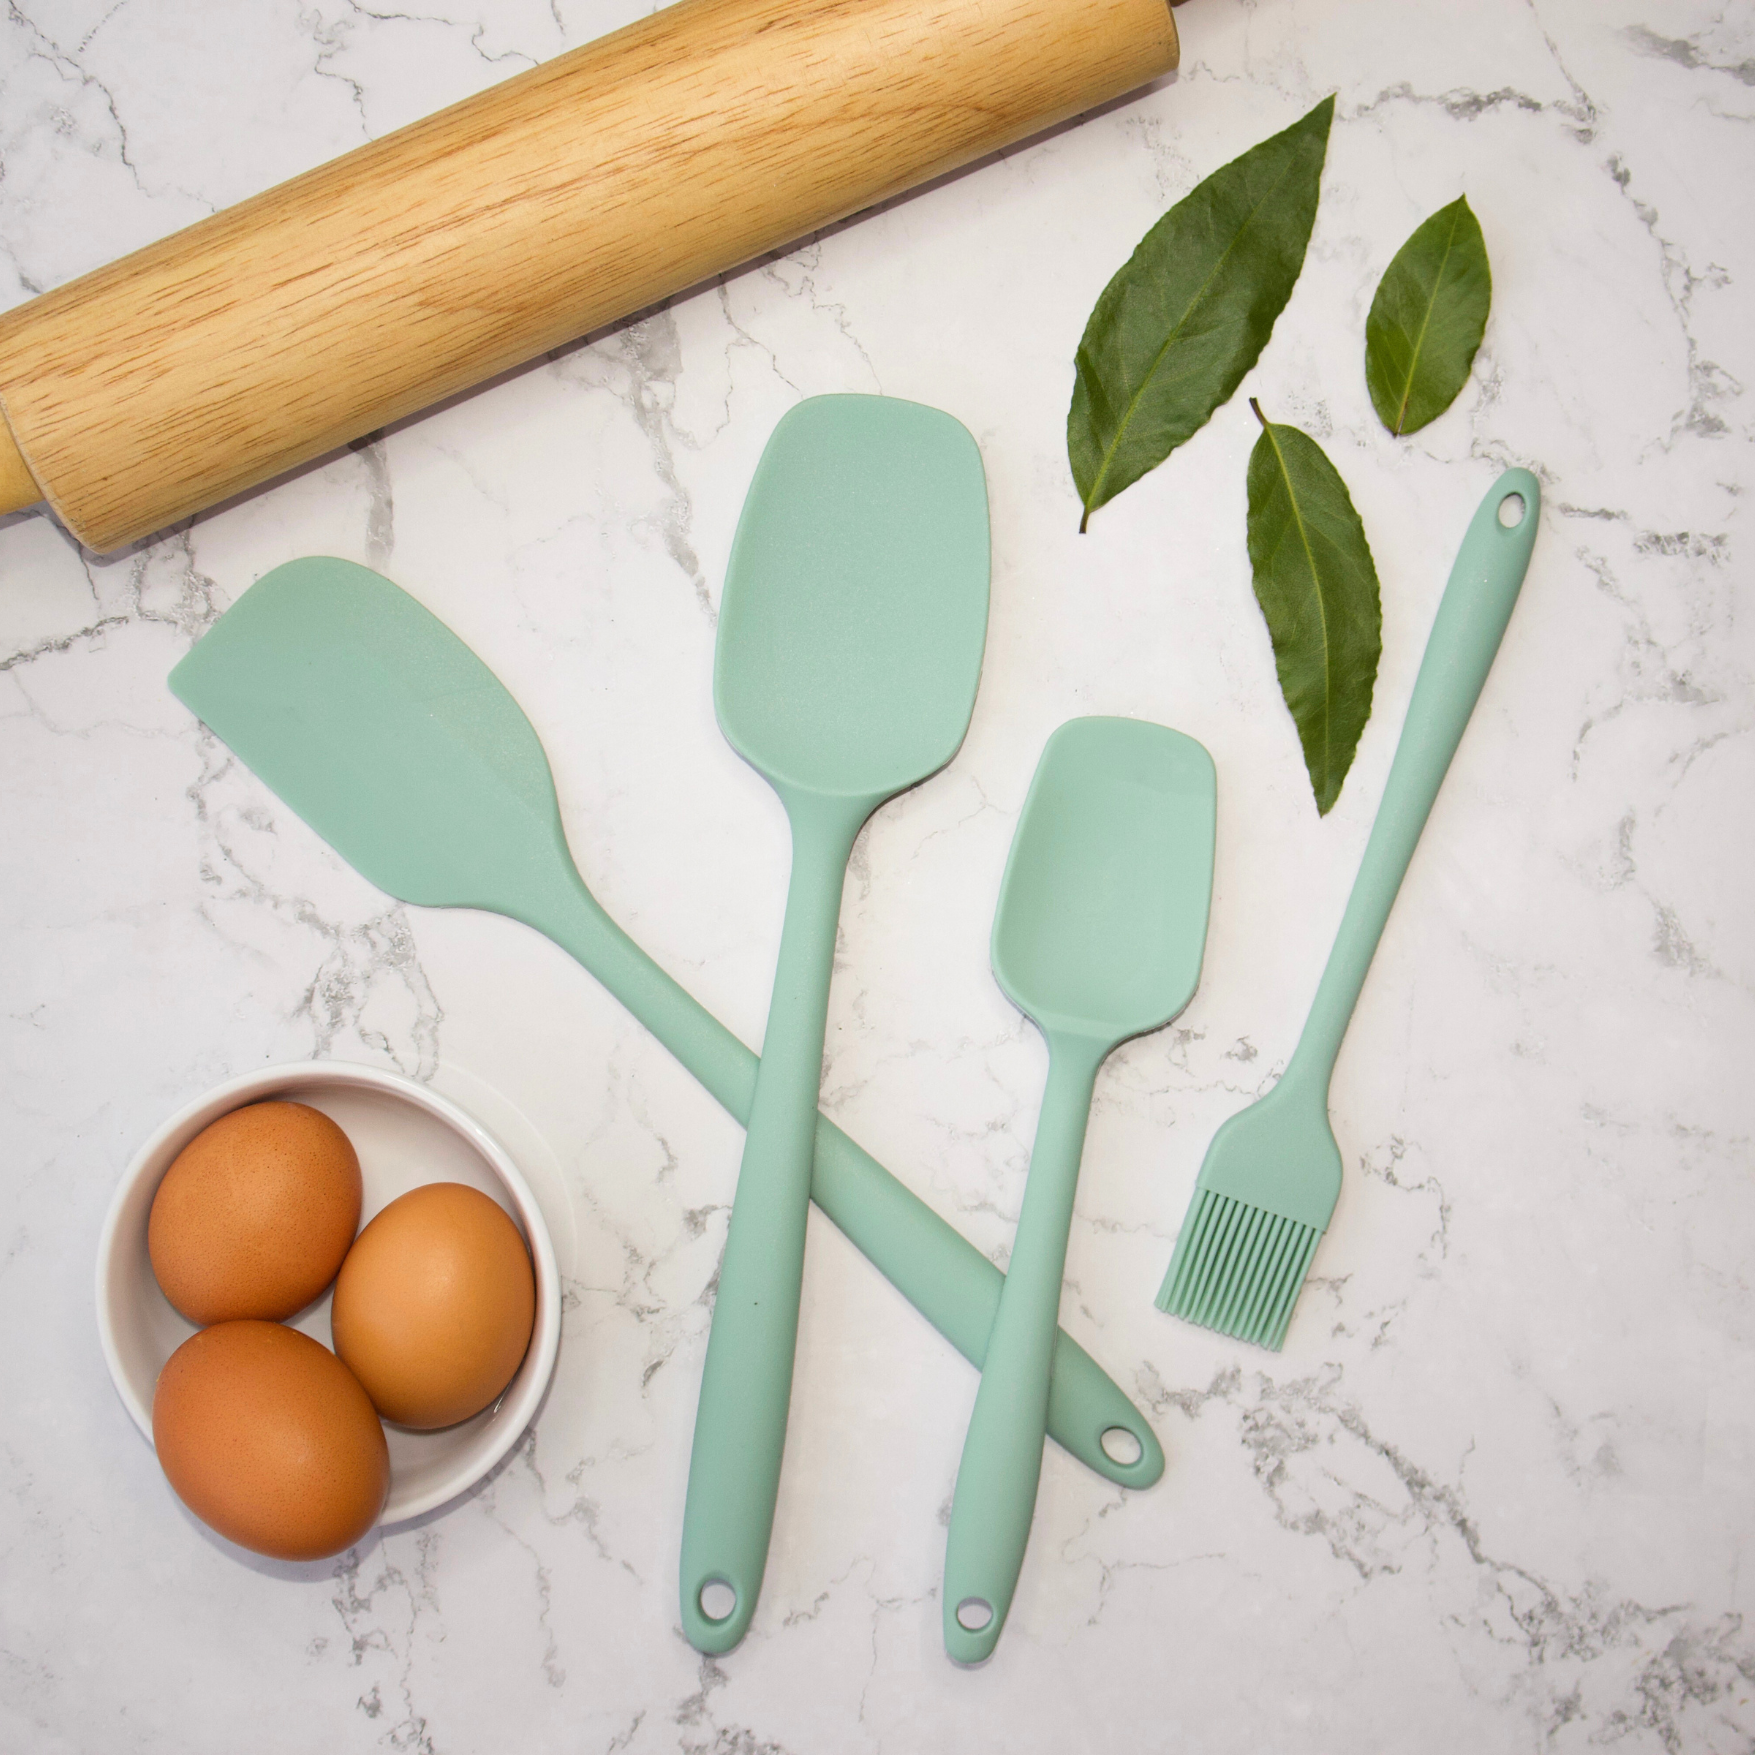 An innovative and versatile Hello High 4-piece silicone spatula set with basting brush. The set includes various spatula shapes for all your kitchen needs, made from high-quality silicone. The ergonomic design ensures comfortable use, and the basting brush adds a convenient touch for glazing and spreading. Perfect for cooking enthusiasts seeking durable and stylish kitchen tools